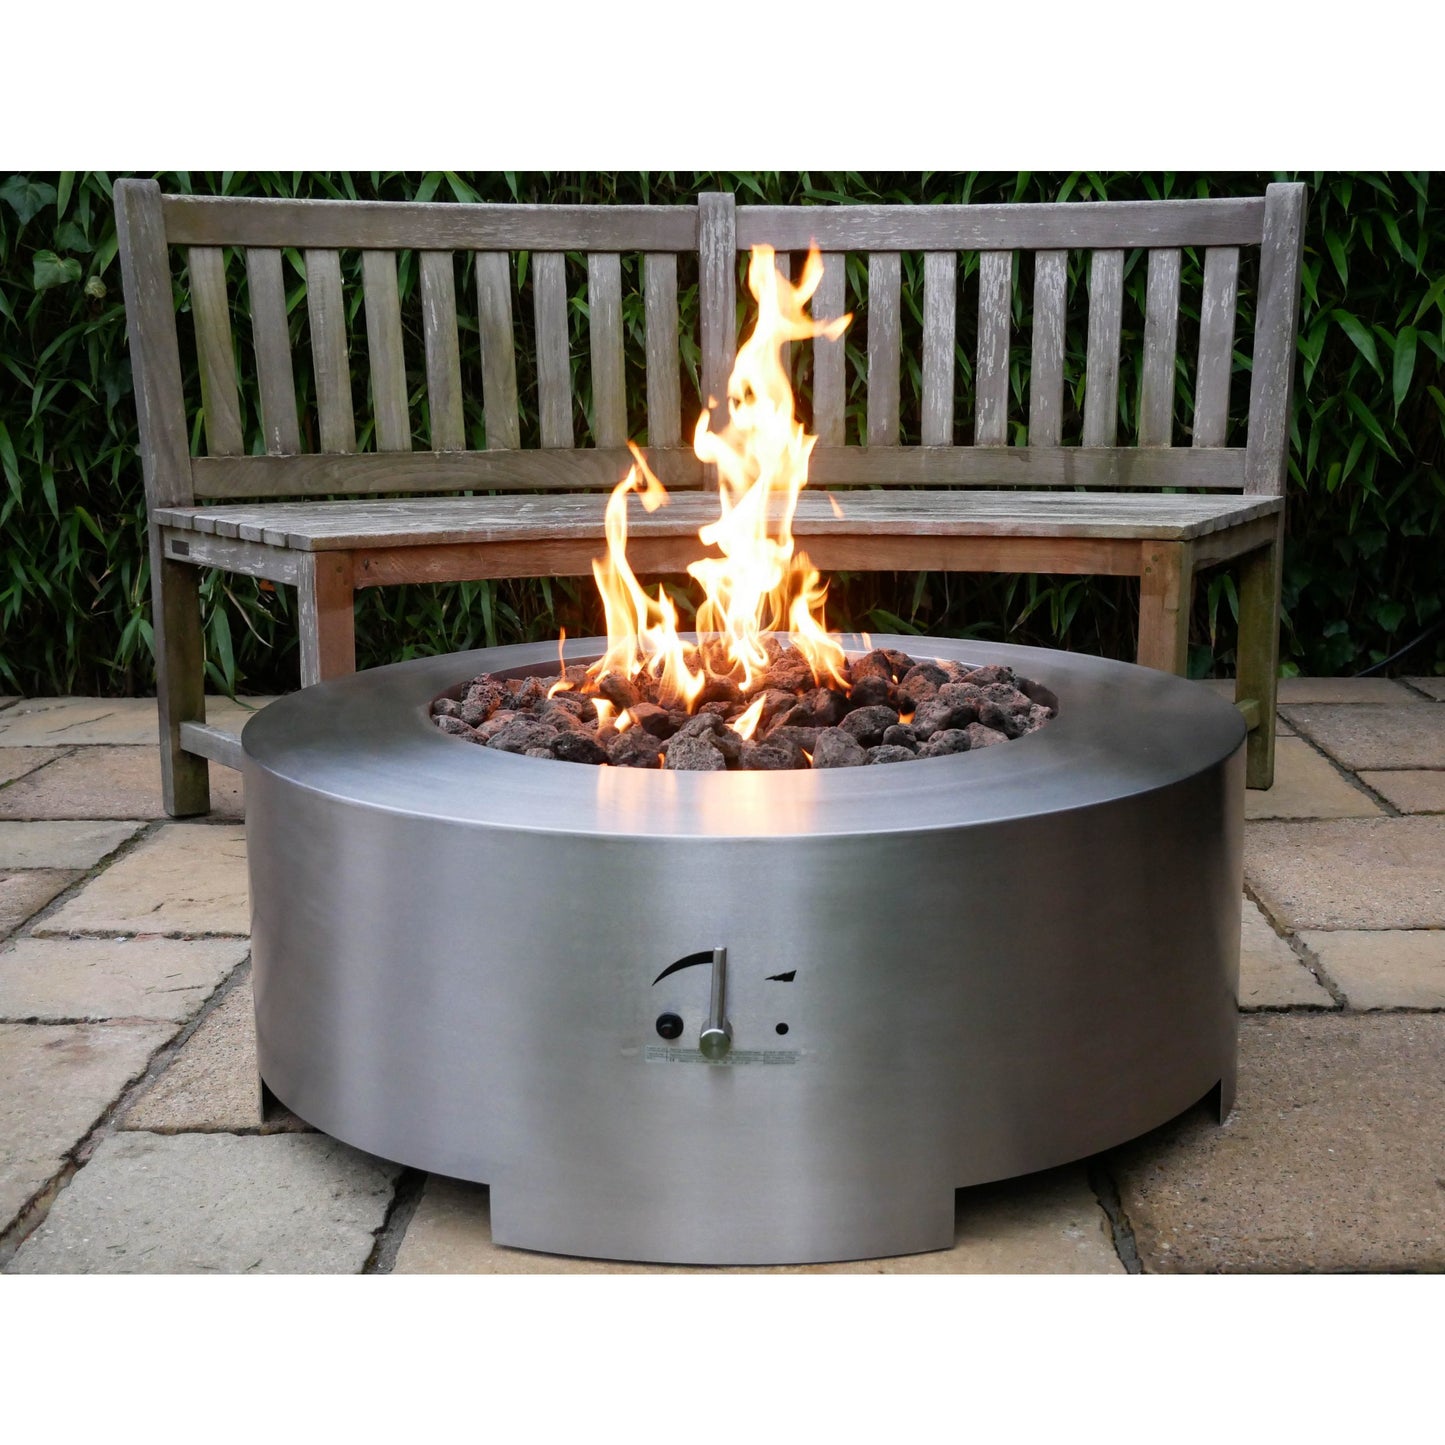 Brightstar Fires - Saturn Gas Fire Pit Table - Round - Luxury Fire Pits - PadioLiving - Brightstar Fires - Saturn Gas Fire Pit Table - Round - Luxury Fire Pits - Fire Pit Table - PadioLiving